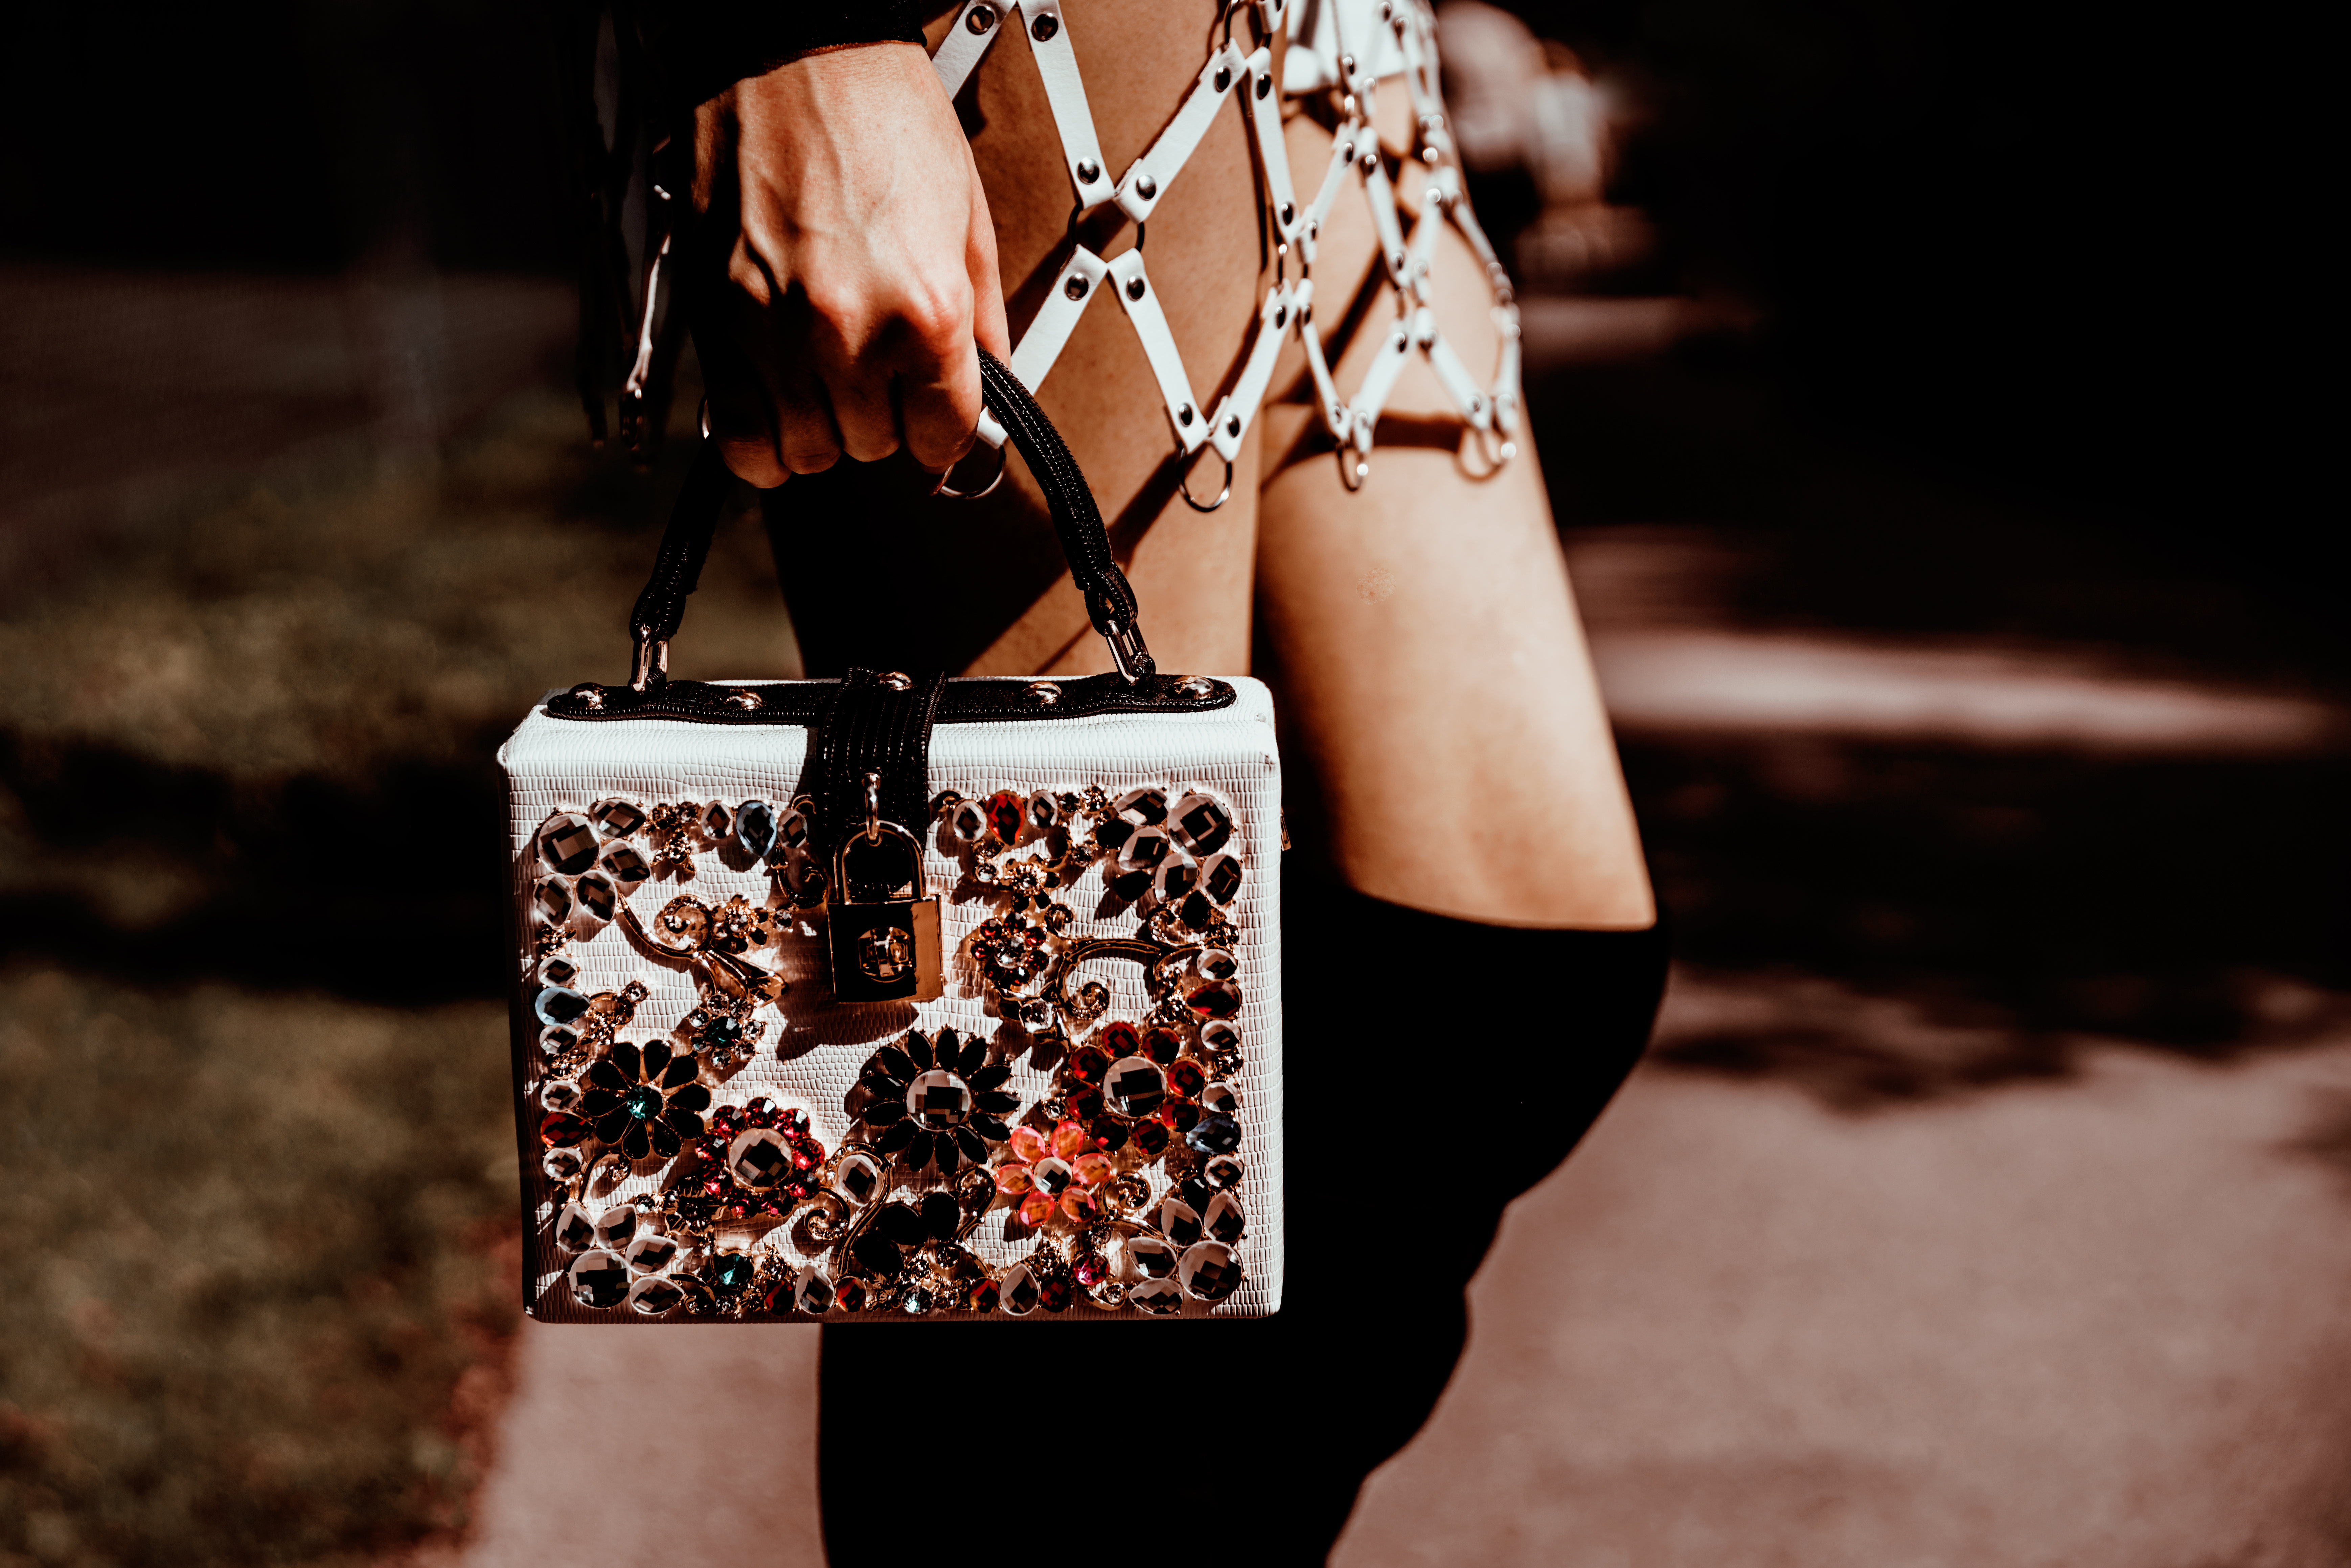 The Truth About Counterfeit Luxury Handbags | by Becca Risa Luna | Medium